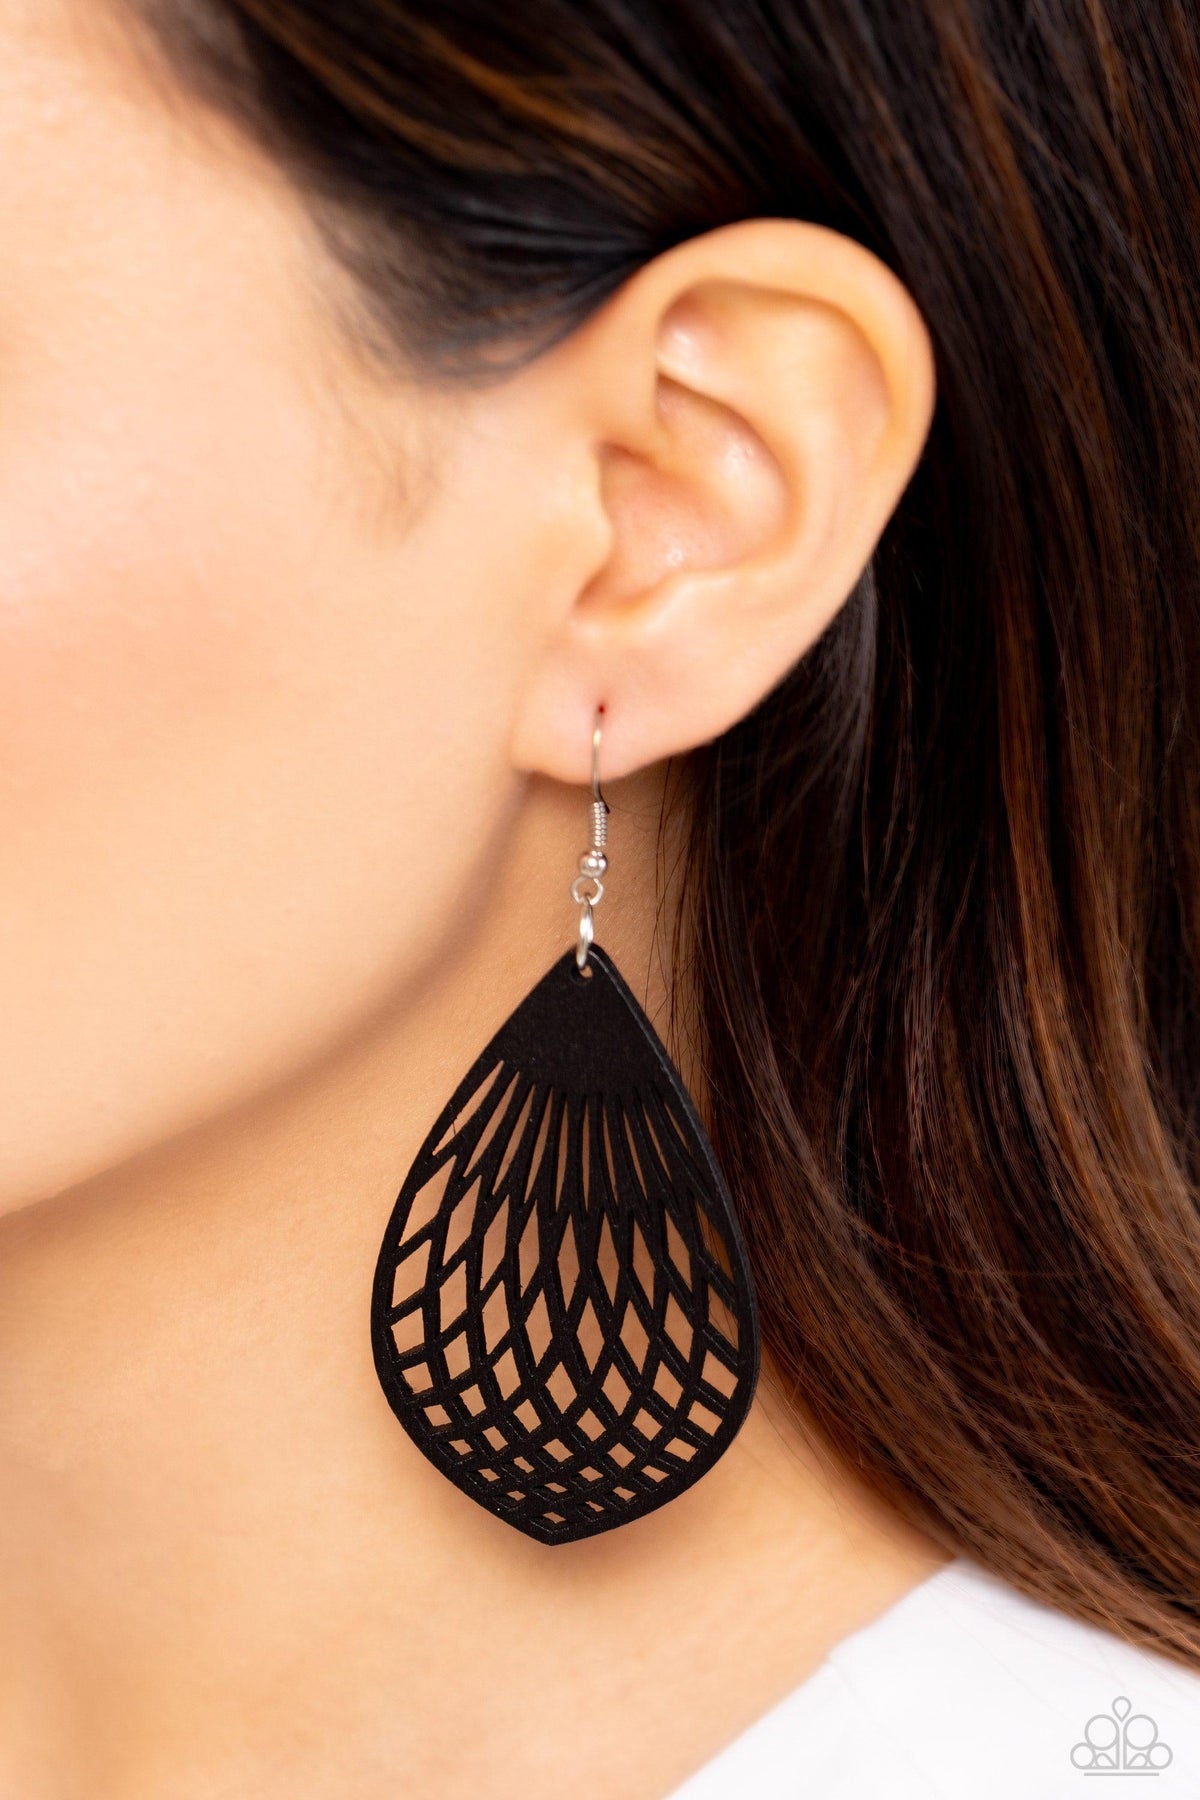 Caribbean Coral Black Wood Earrings - Paparazzi Accessories-on model - CarasShop.com - $5 Jewelry by Cara Jewels